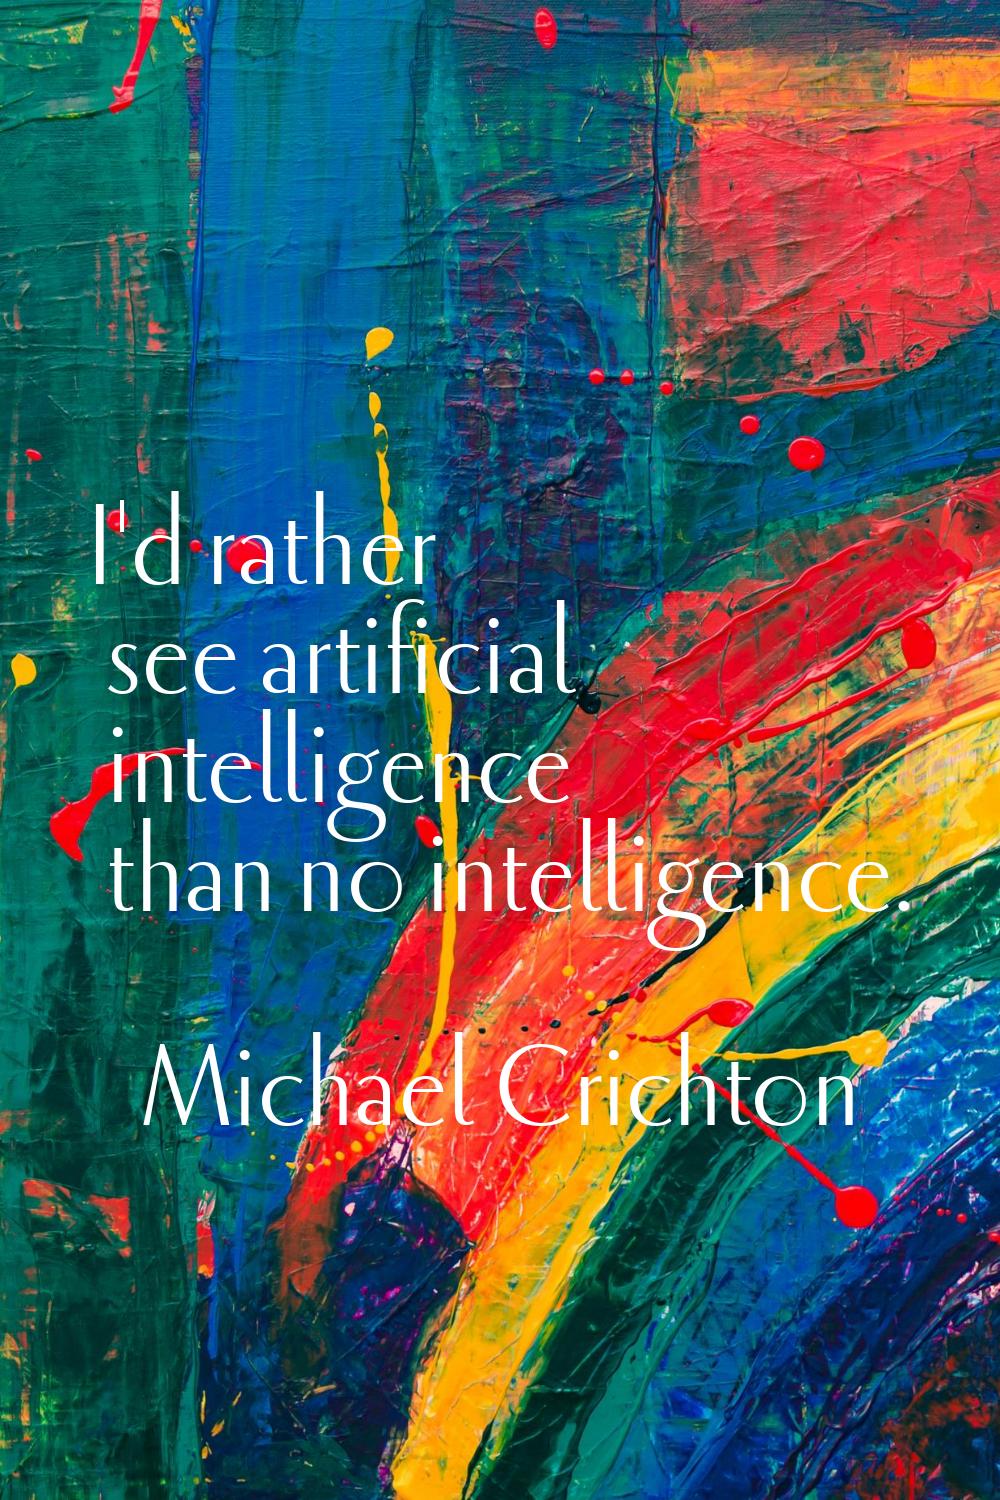 I'd rather see artificial intelligence than no intelligence.